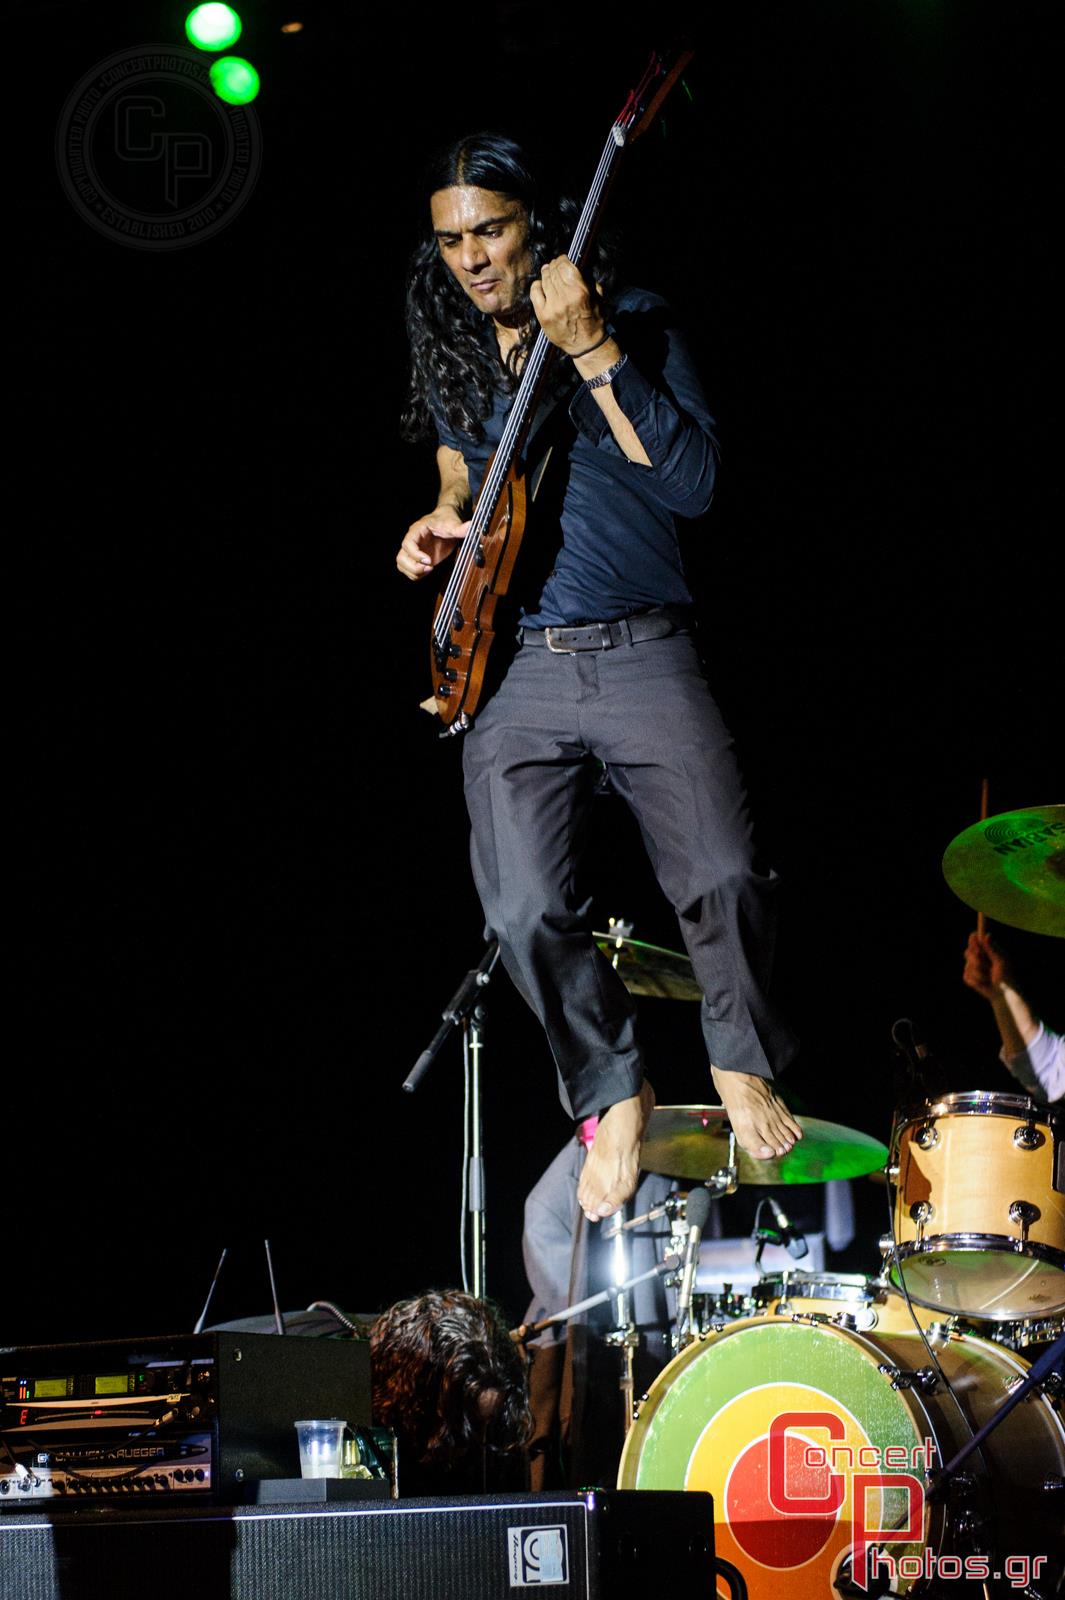 Thievery Corporation Imam Baildi Boogie Belgique Penny And The Swingin' Cats-Thievery Corporation Imam Baildi Boogie Belgique Penny And The Swingin' Cats photographer:  - concertphotos_20140617_23_30_34-4